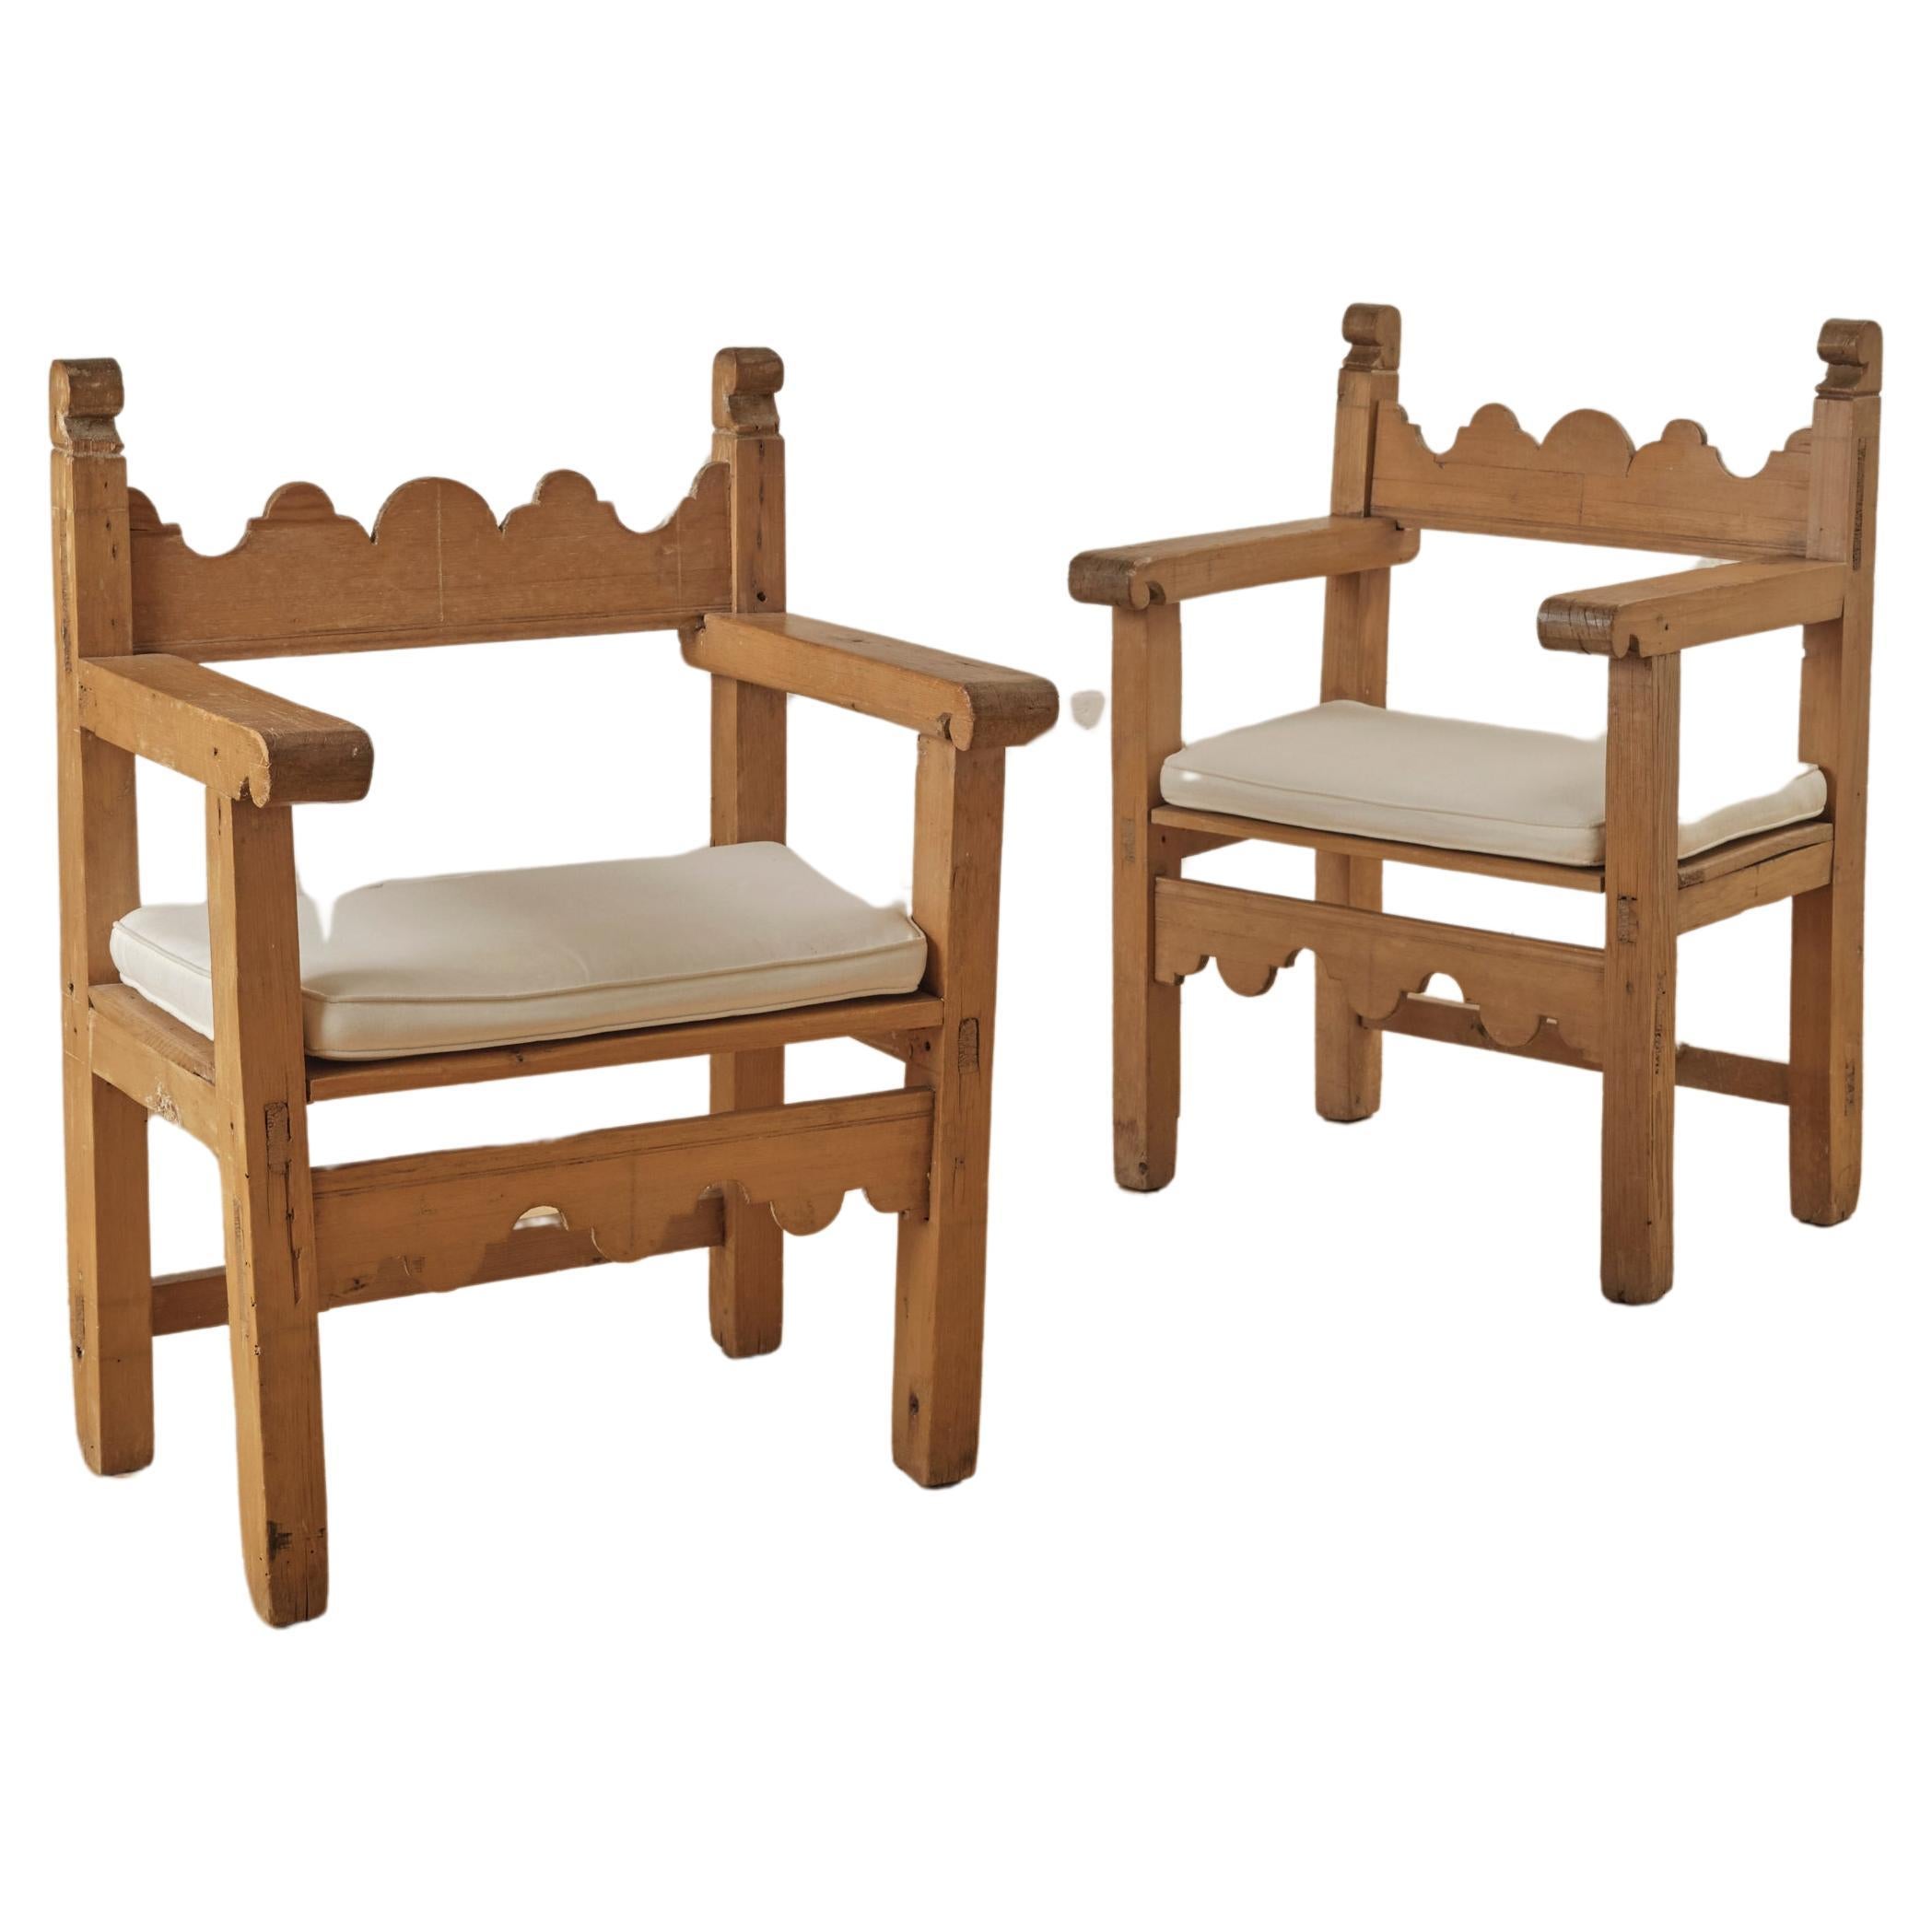 A Pair of 17th Century Spanish Colonial Armchairs